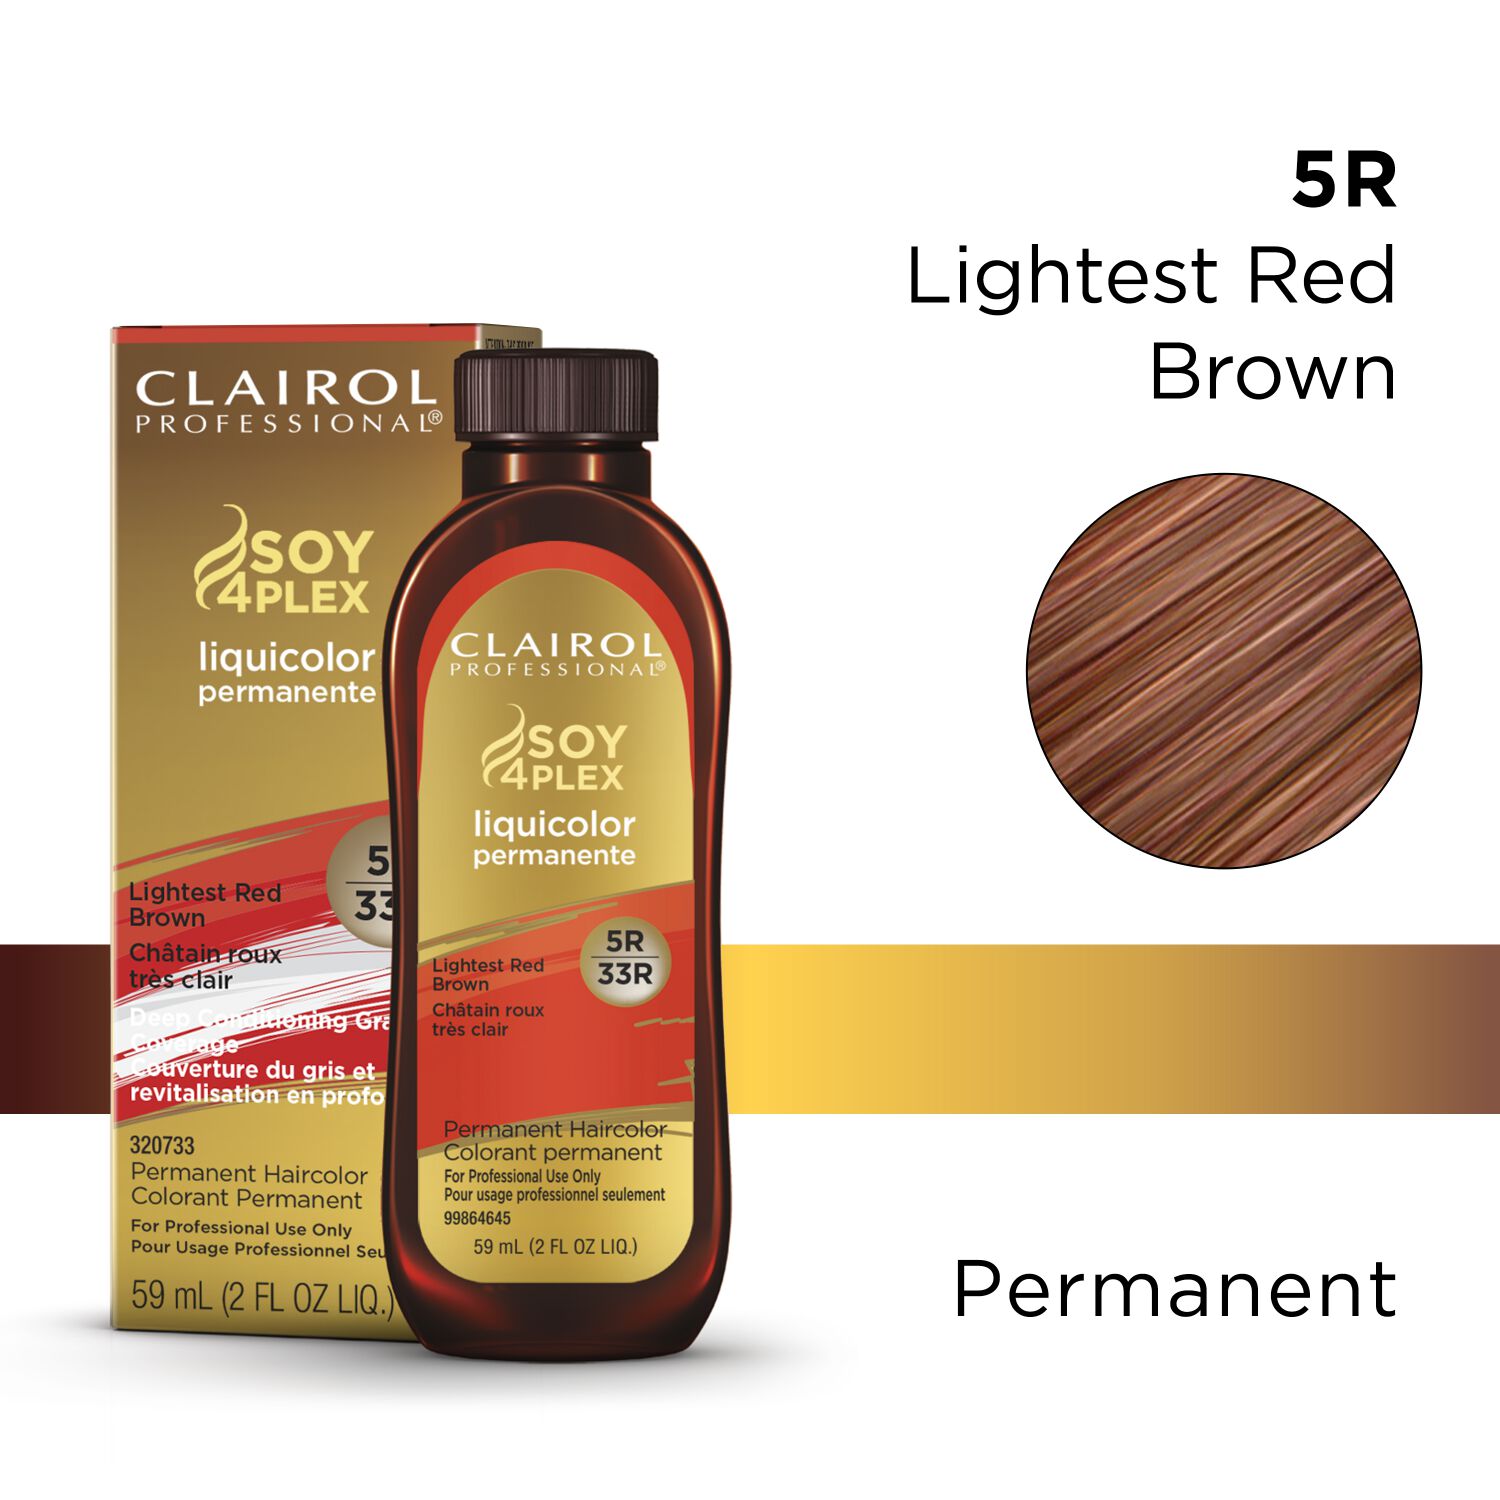 Clairol Professional 5R/33R Lightest Red Brown LiquiColor Permanent